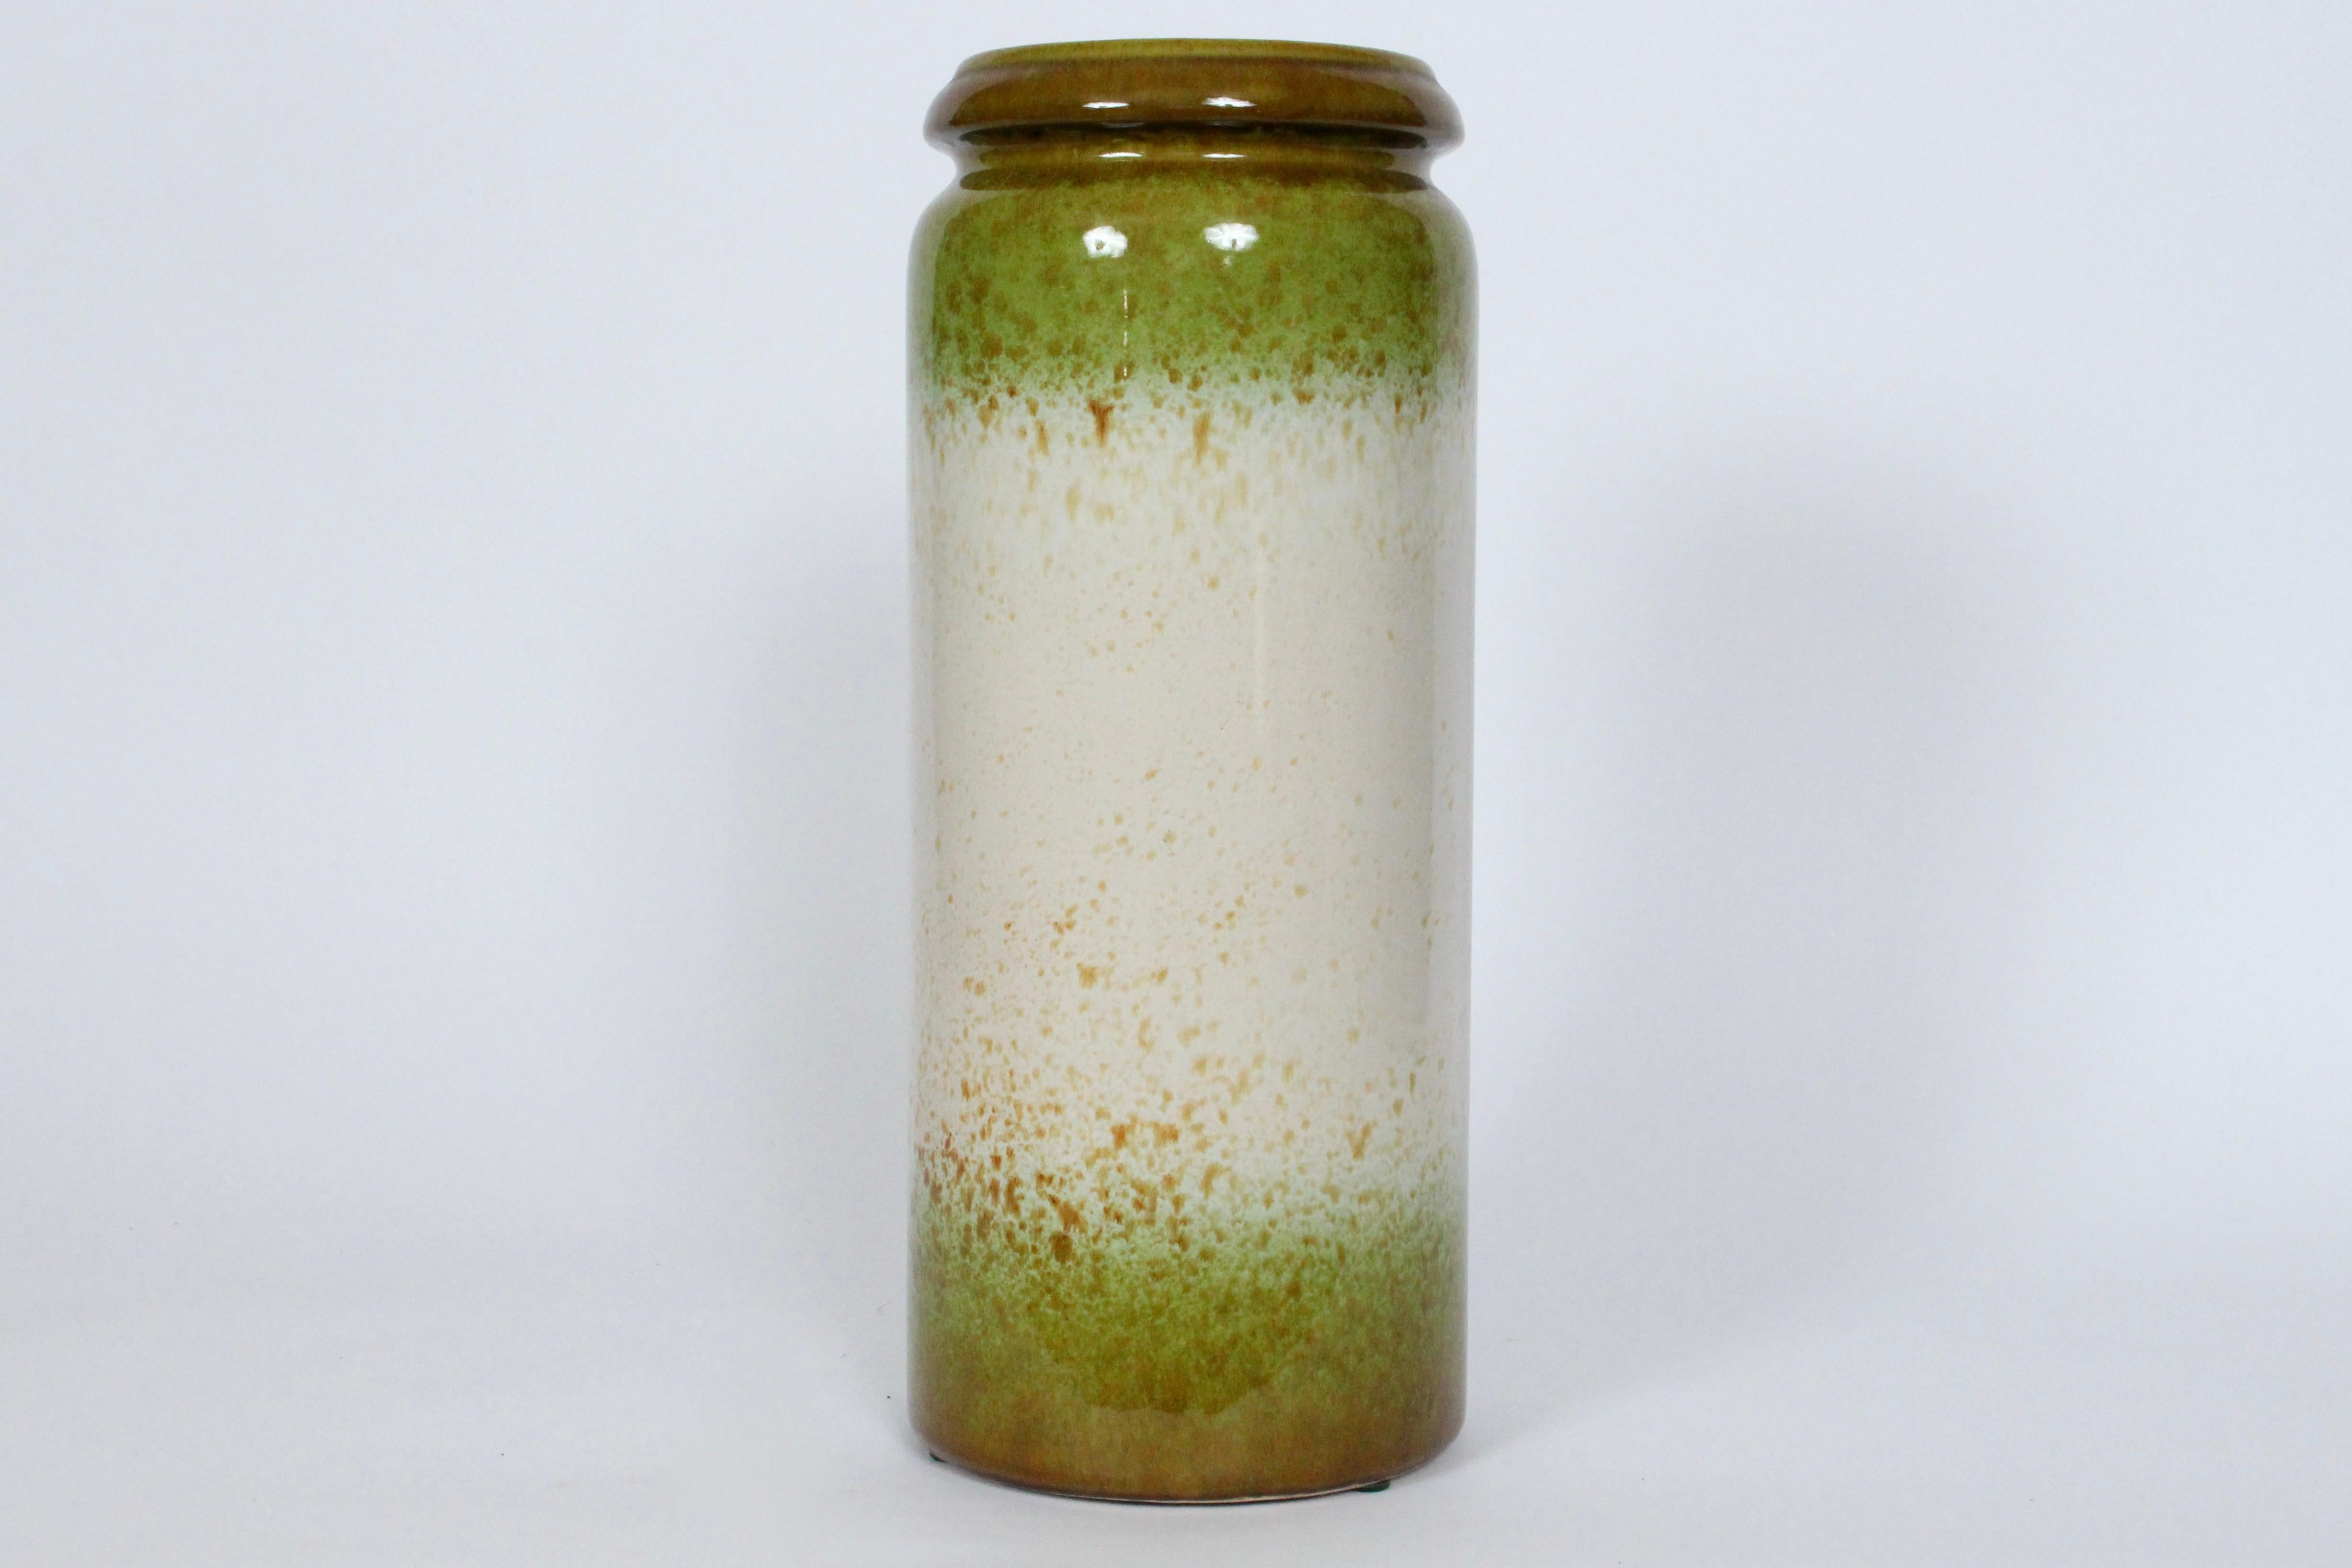 Tall Organic Modern West German Scheurich Keramik Glazed Art Pottery Vase. Featuring a handcrafted cylindrical Pottery form, smooth reflective glaze, Oatmeal center, Spring Green with Coffee Brown splatter effect to top and bottom, with Brown